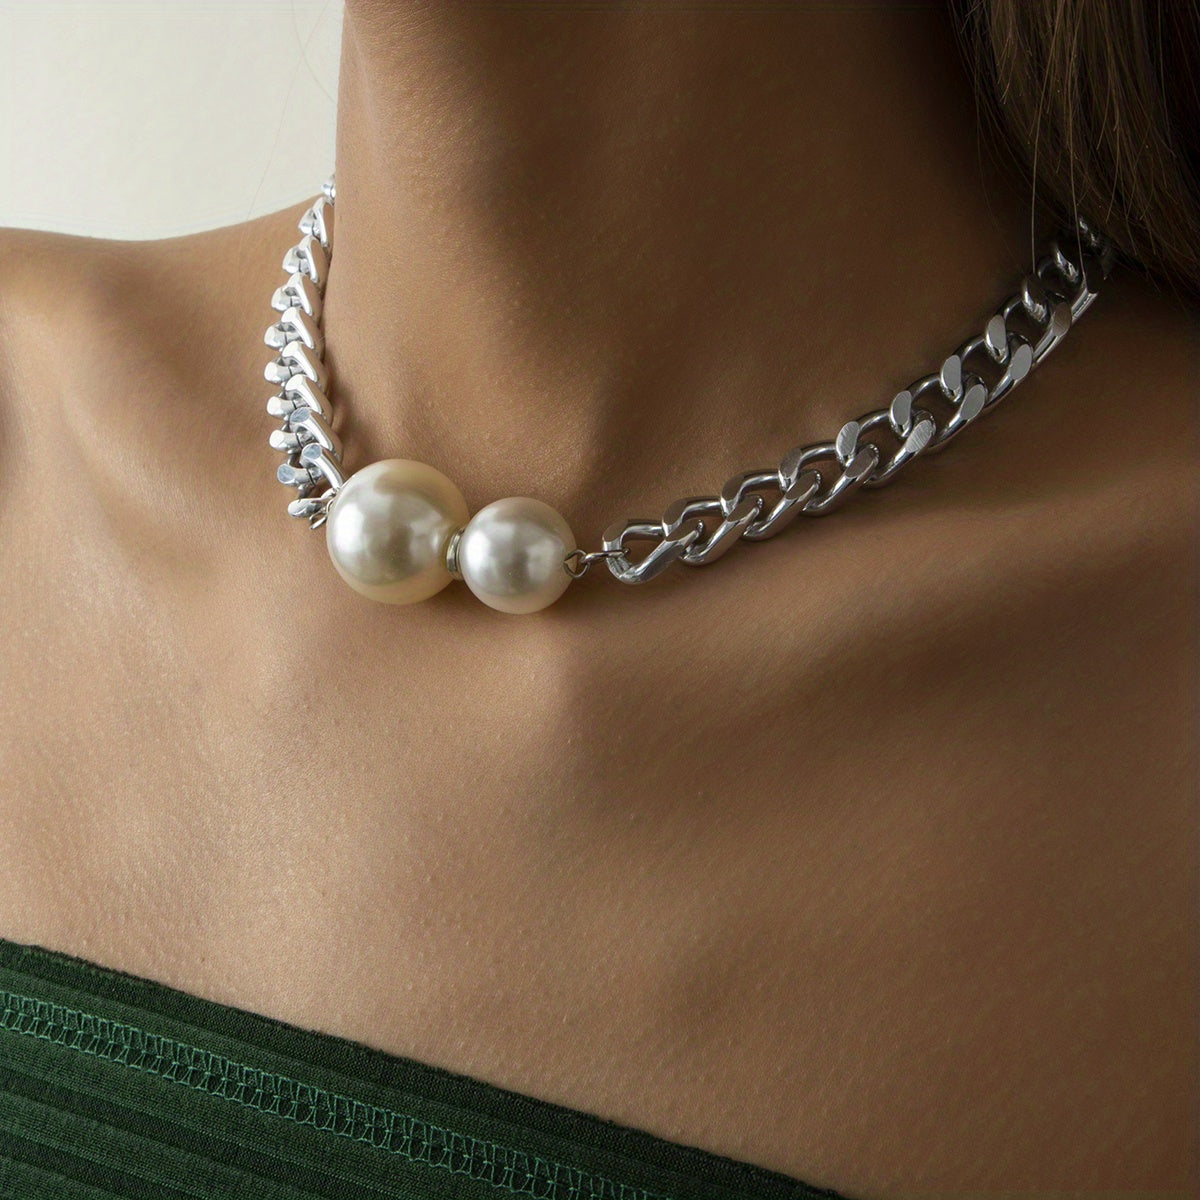 Gorgeous 1 Pc Ladies Fashion Pearl Chain Charm Necklace - A Stylish Accessory for Your Look!